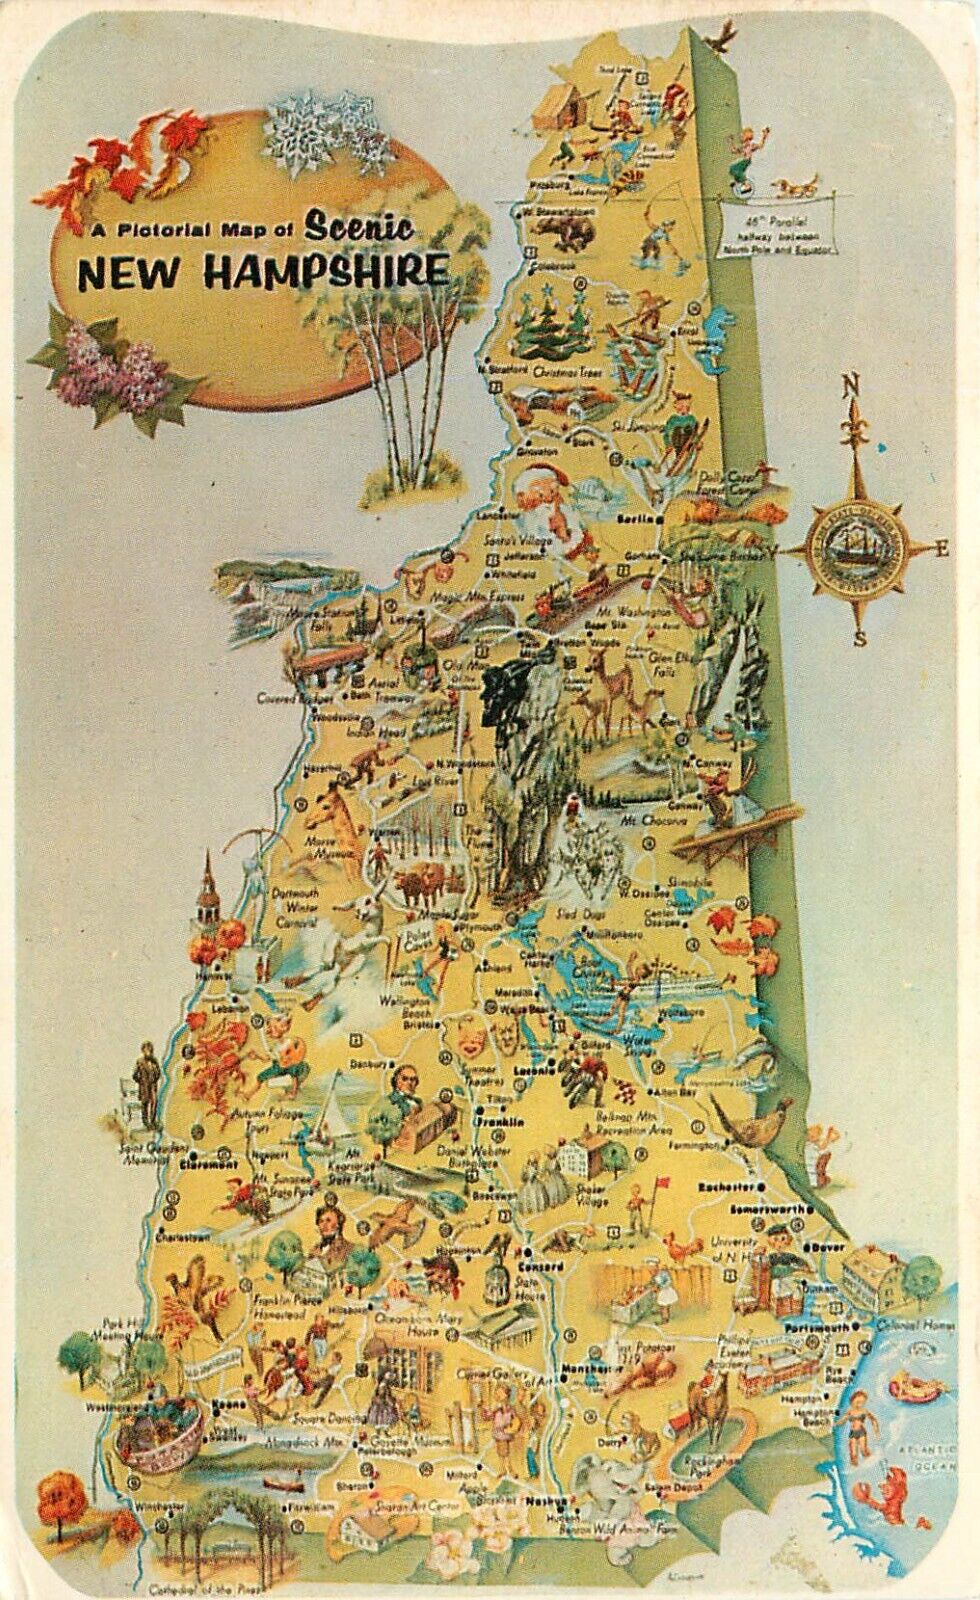 Pictorial Map of New Hampshire NH Postcard